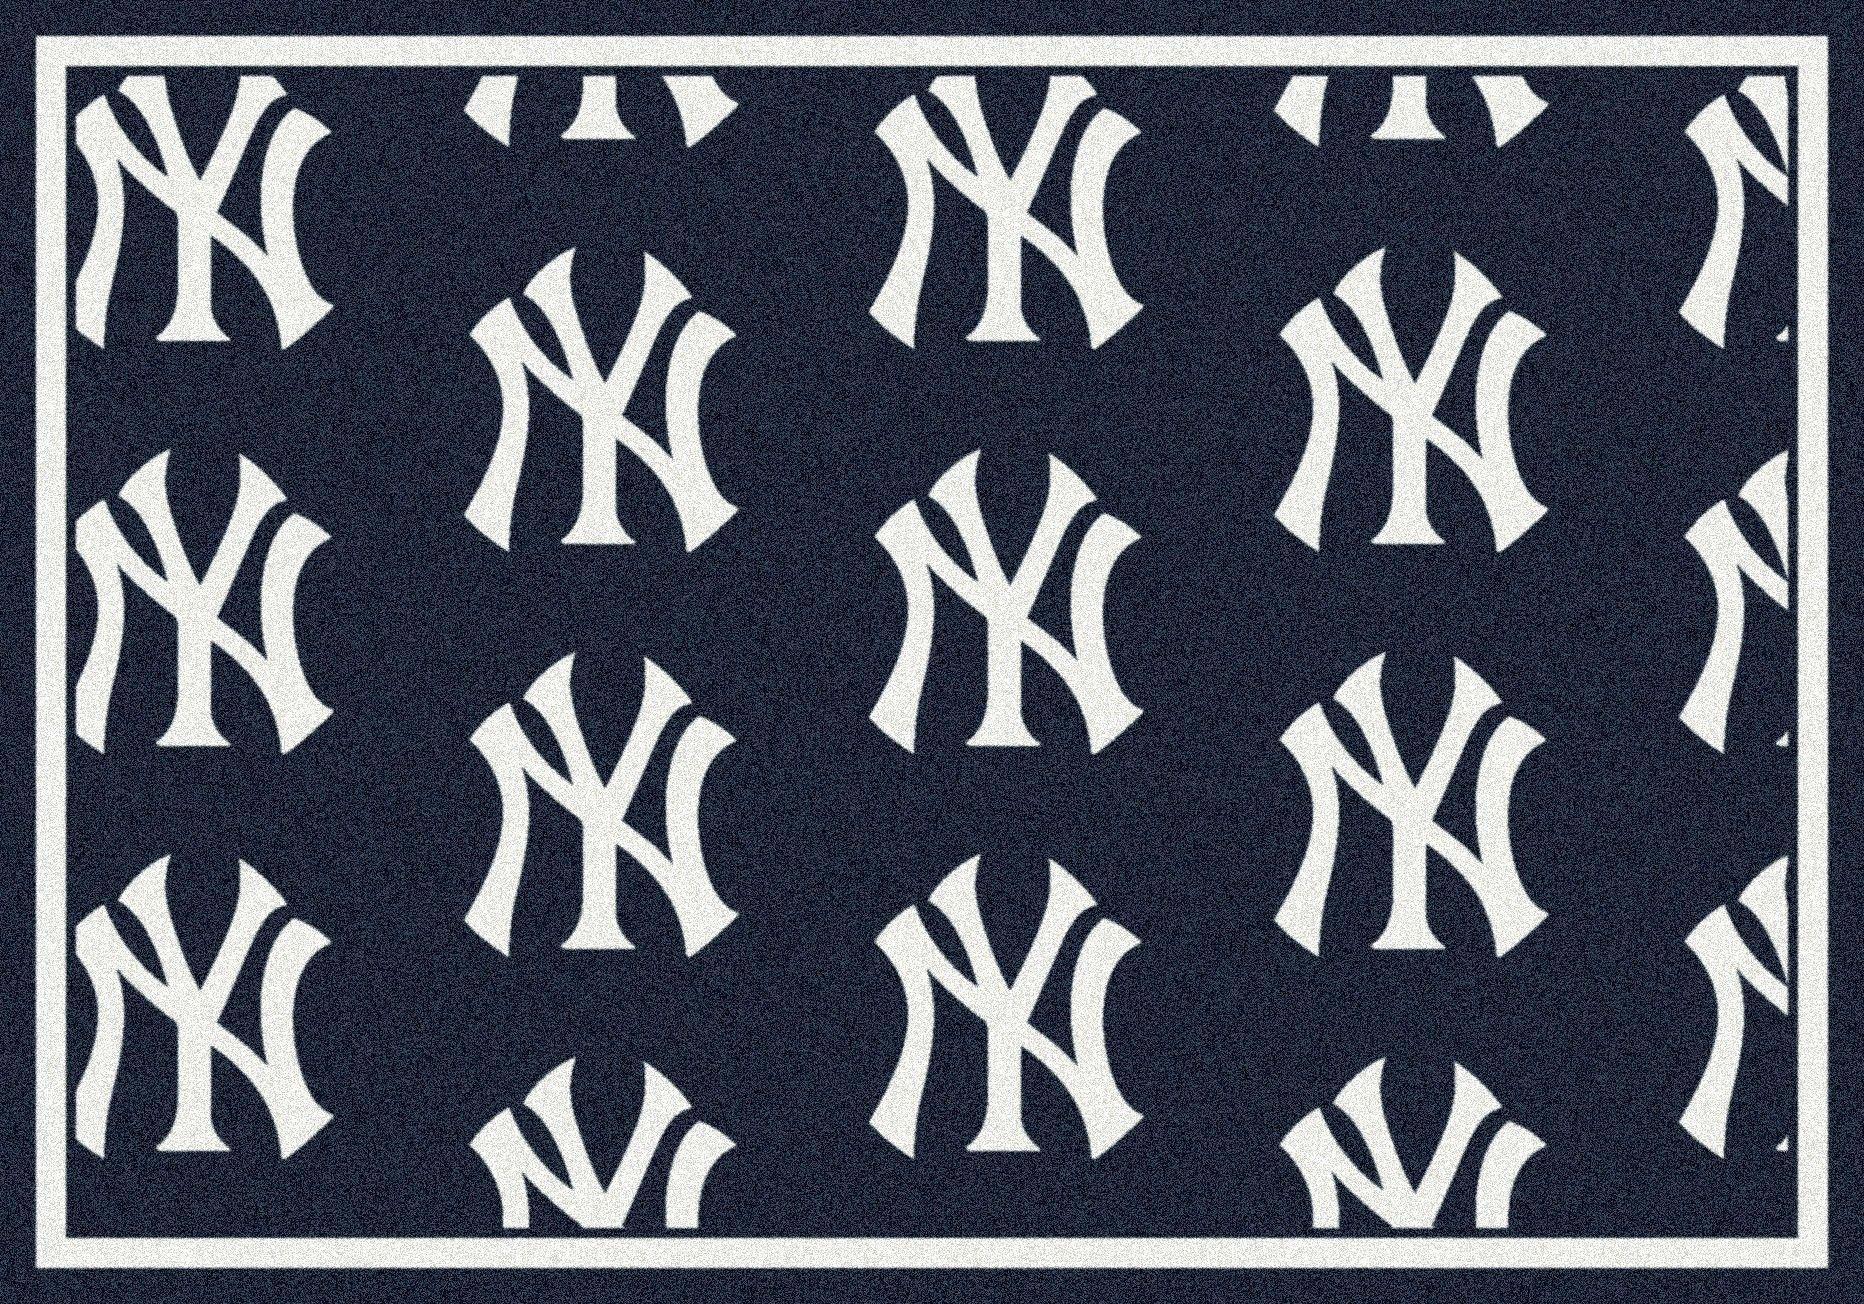 Download wallpapers New York Yankees fire logo MLB blue and white lines  american baseball team NY Yankees grunge baseball New York Yankees logo  wooden texture USA for desktop with resolution 2880x1800 High